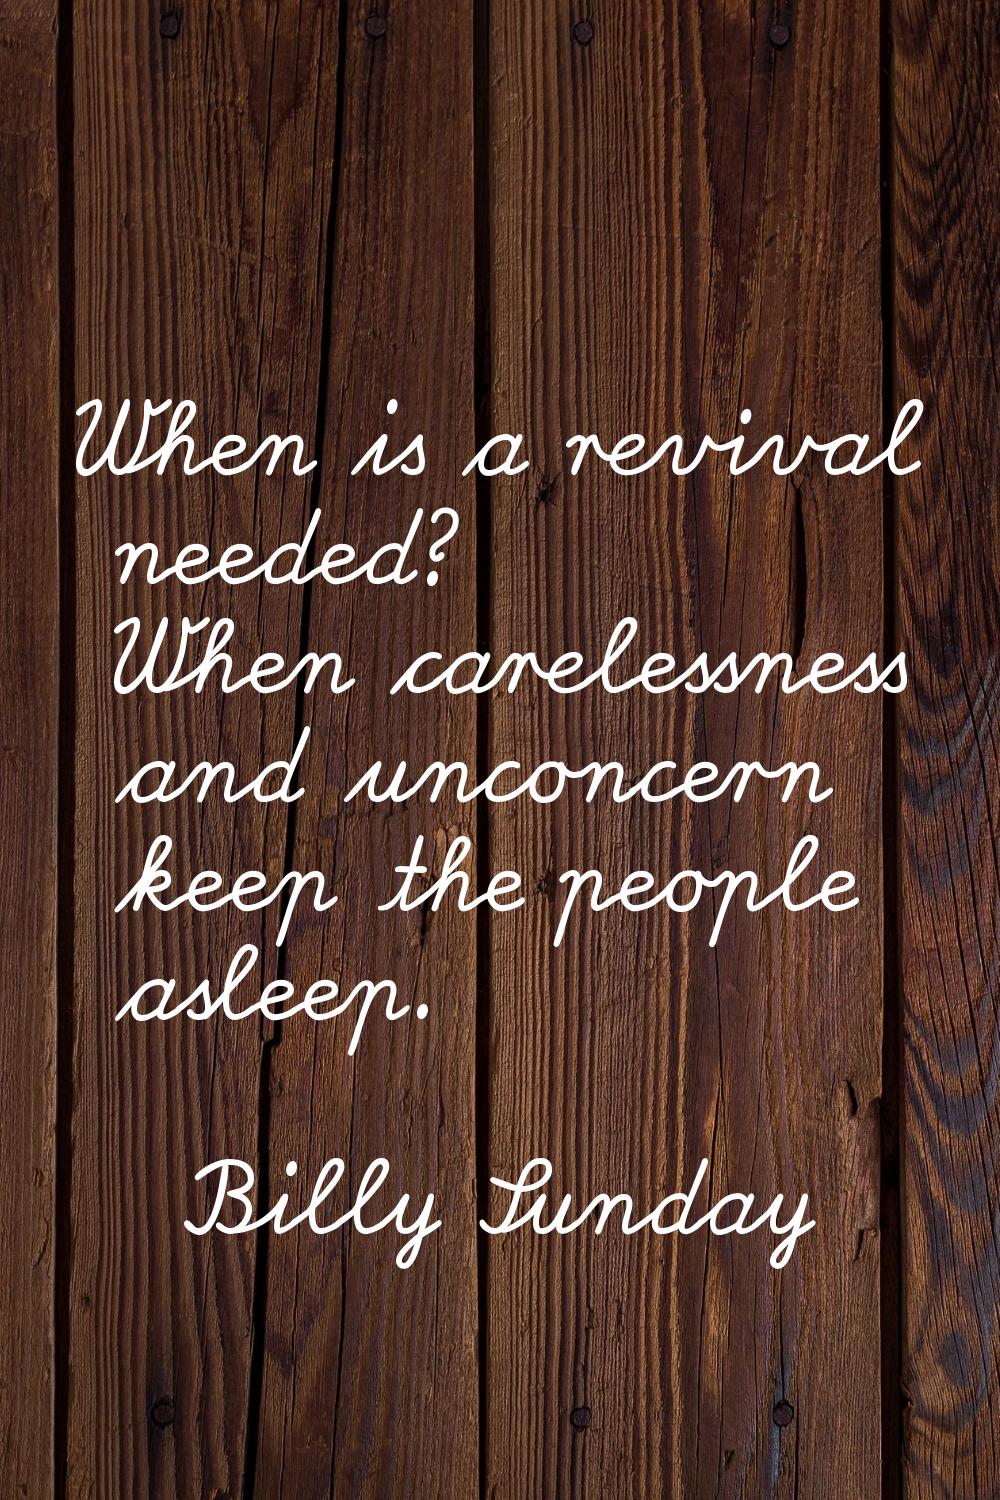 When is a revival needed? When carelessness and unconcern keep the people asleep.